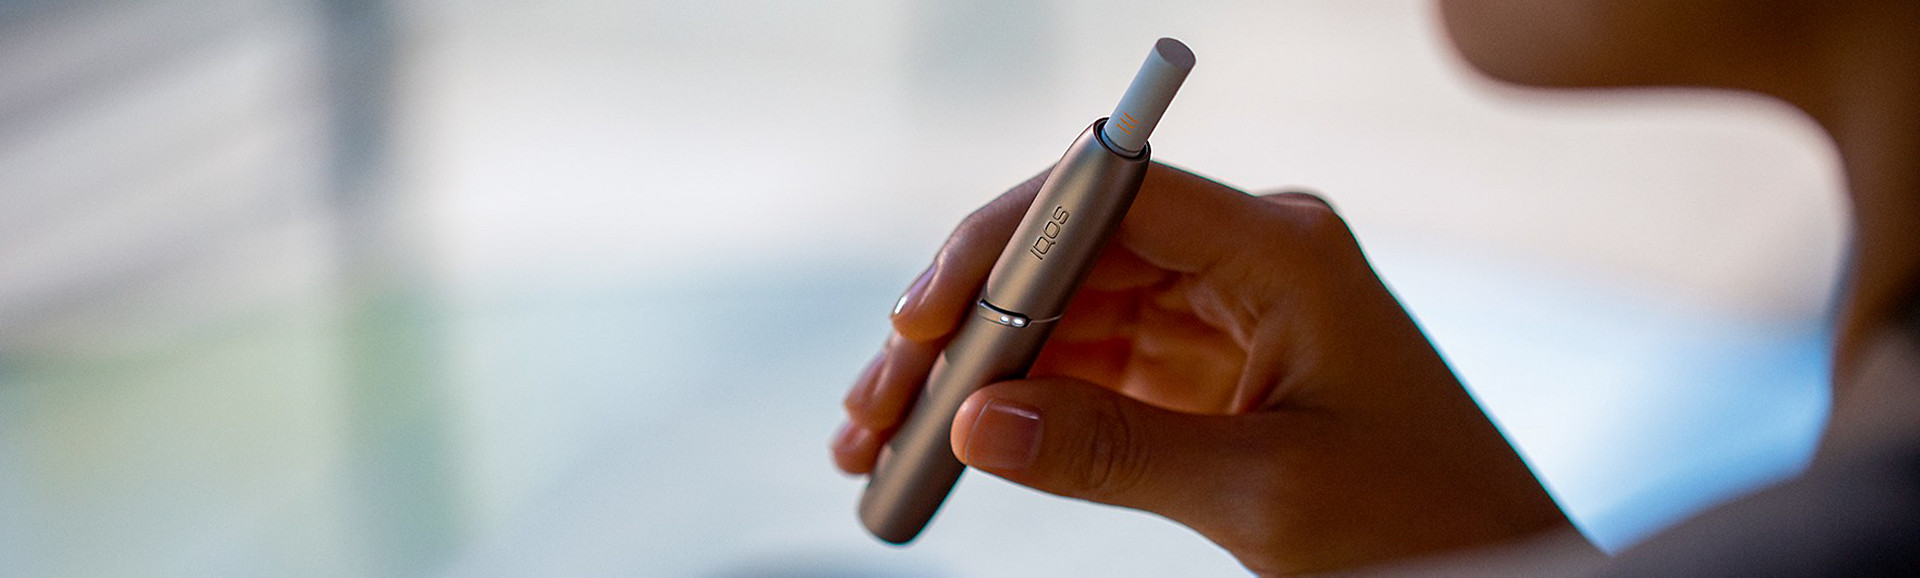 IQOS vs E-Cigarettes. What is the difference?